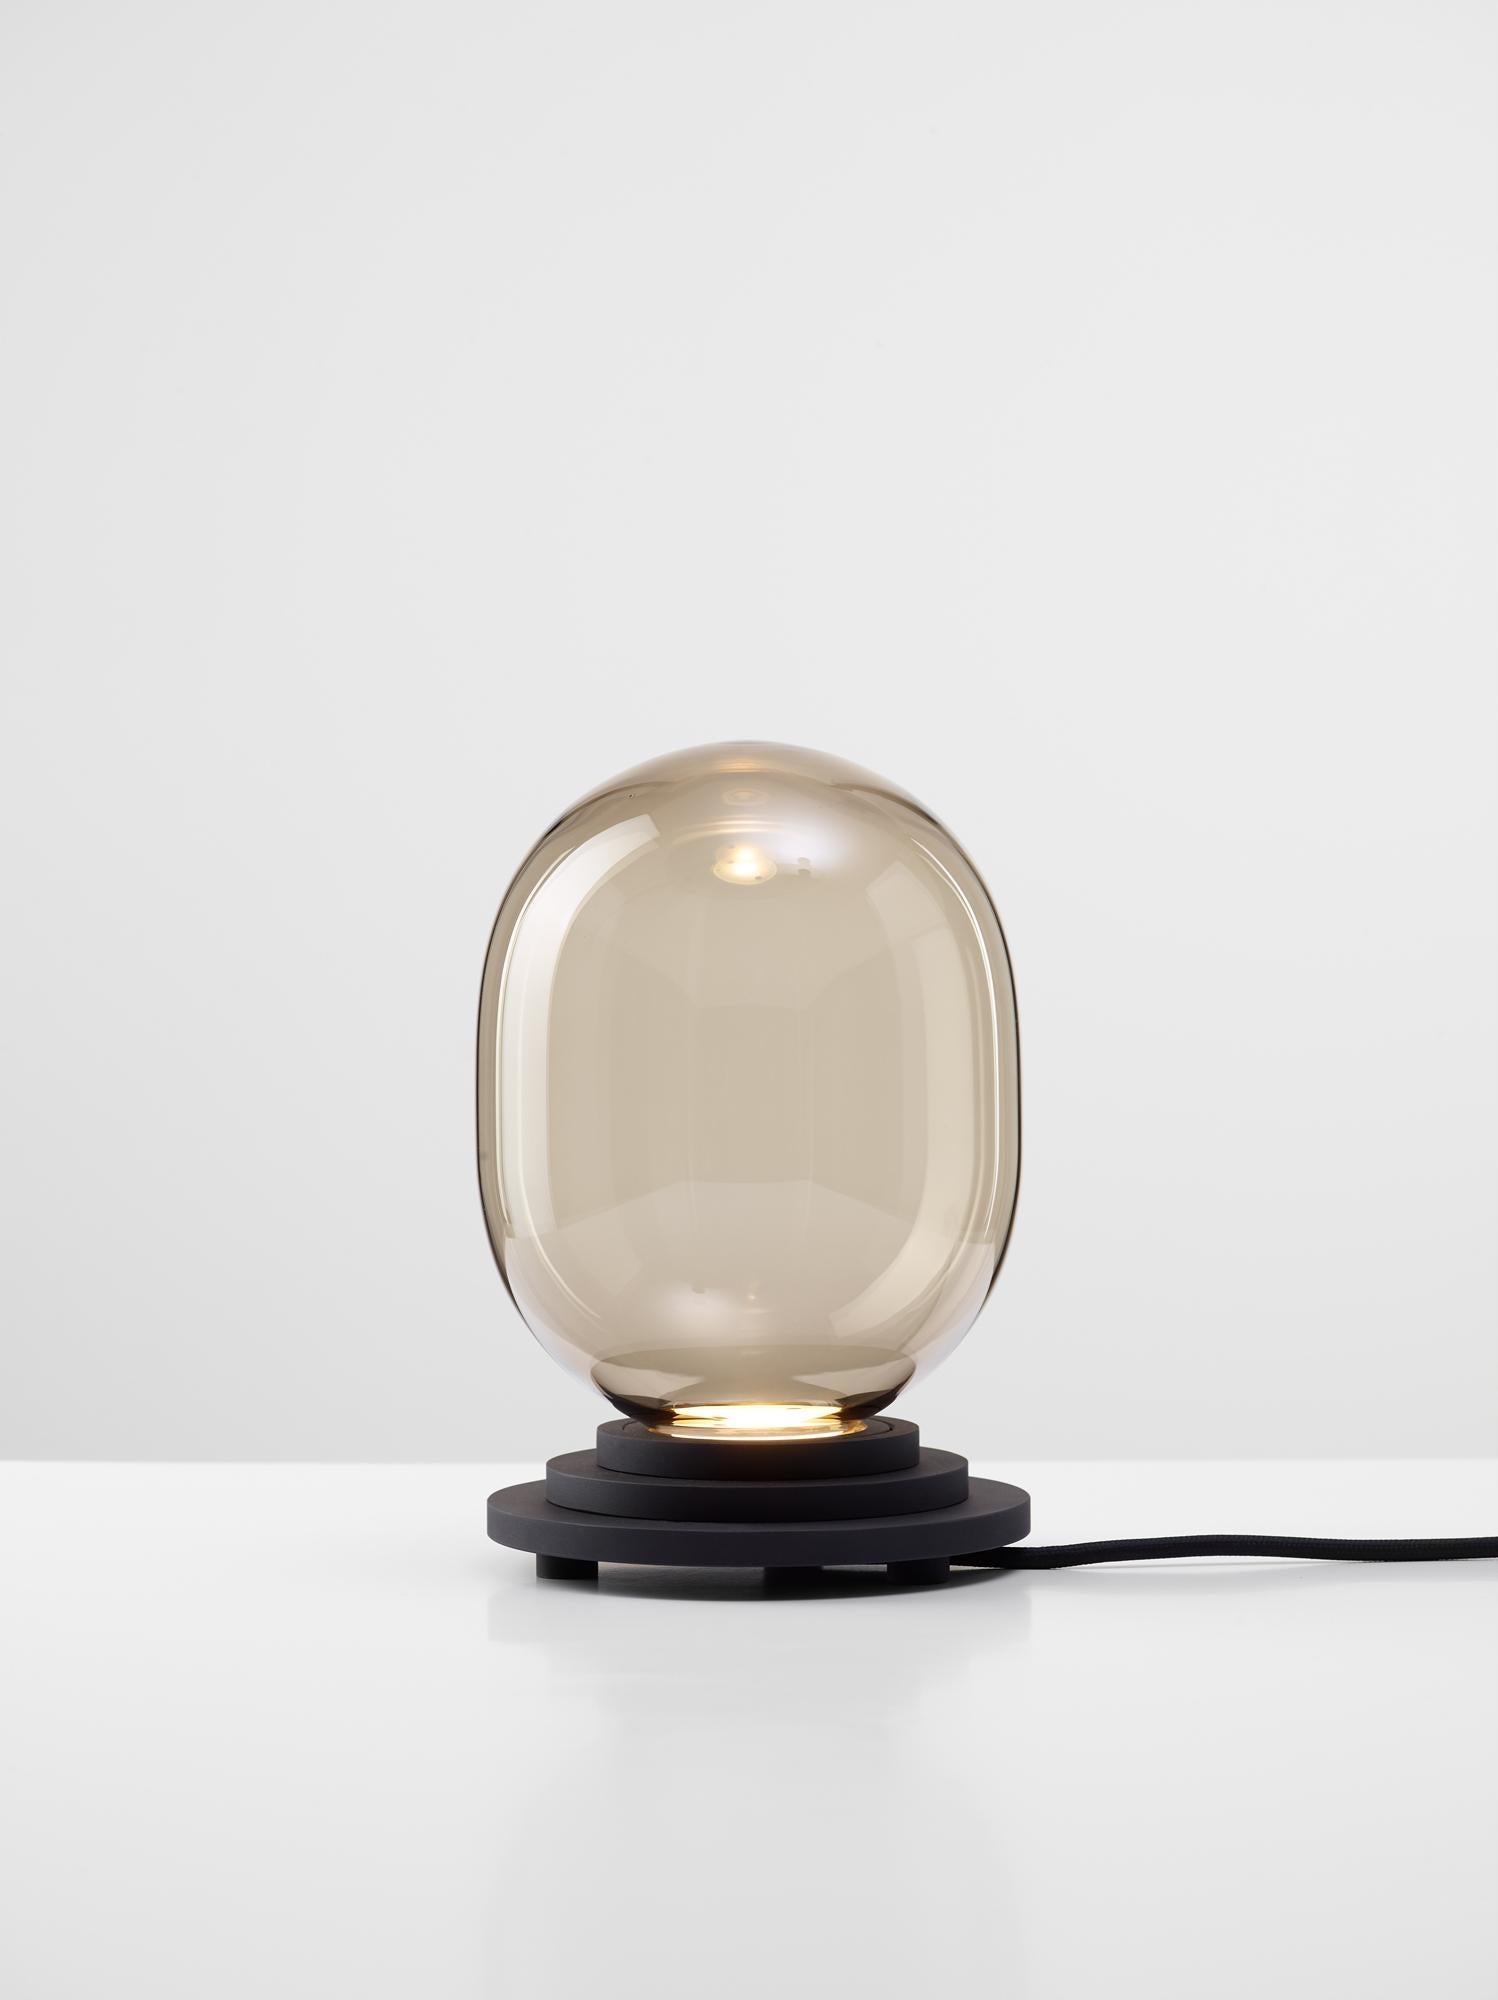 Black Stratos capsule table light by Dechem Studio
Dimensions: D 15 x H 22 cm
Materials: Aluminum, glass.
Also available: Different colours available,

Different shapes of capsules and spheres contrast with anodized alloy fixtures, creating a